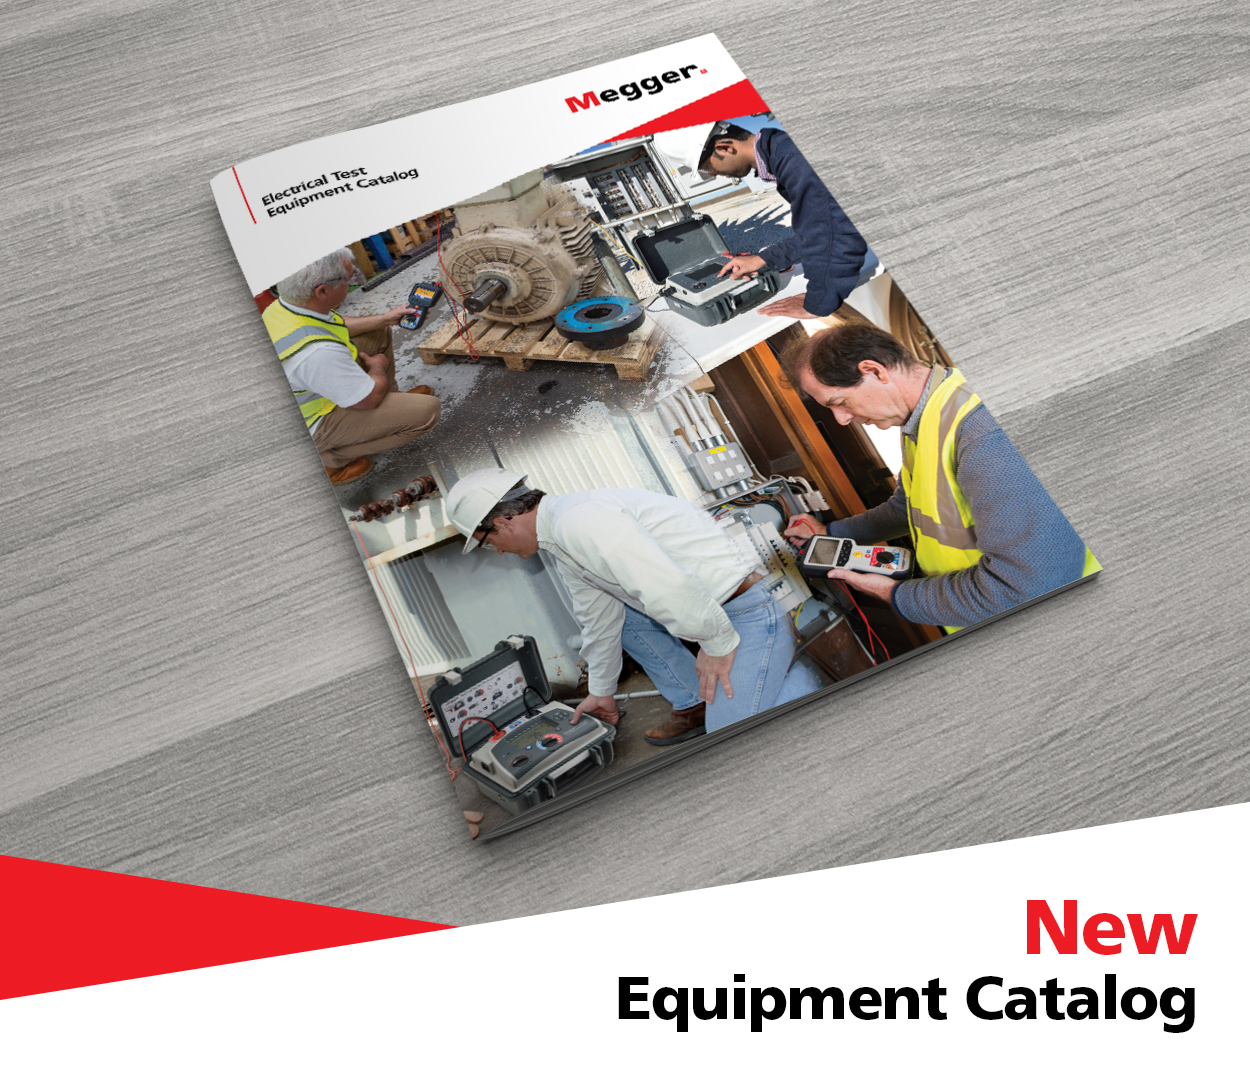 NEW Electrical Test Equipment Catalog